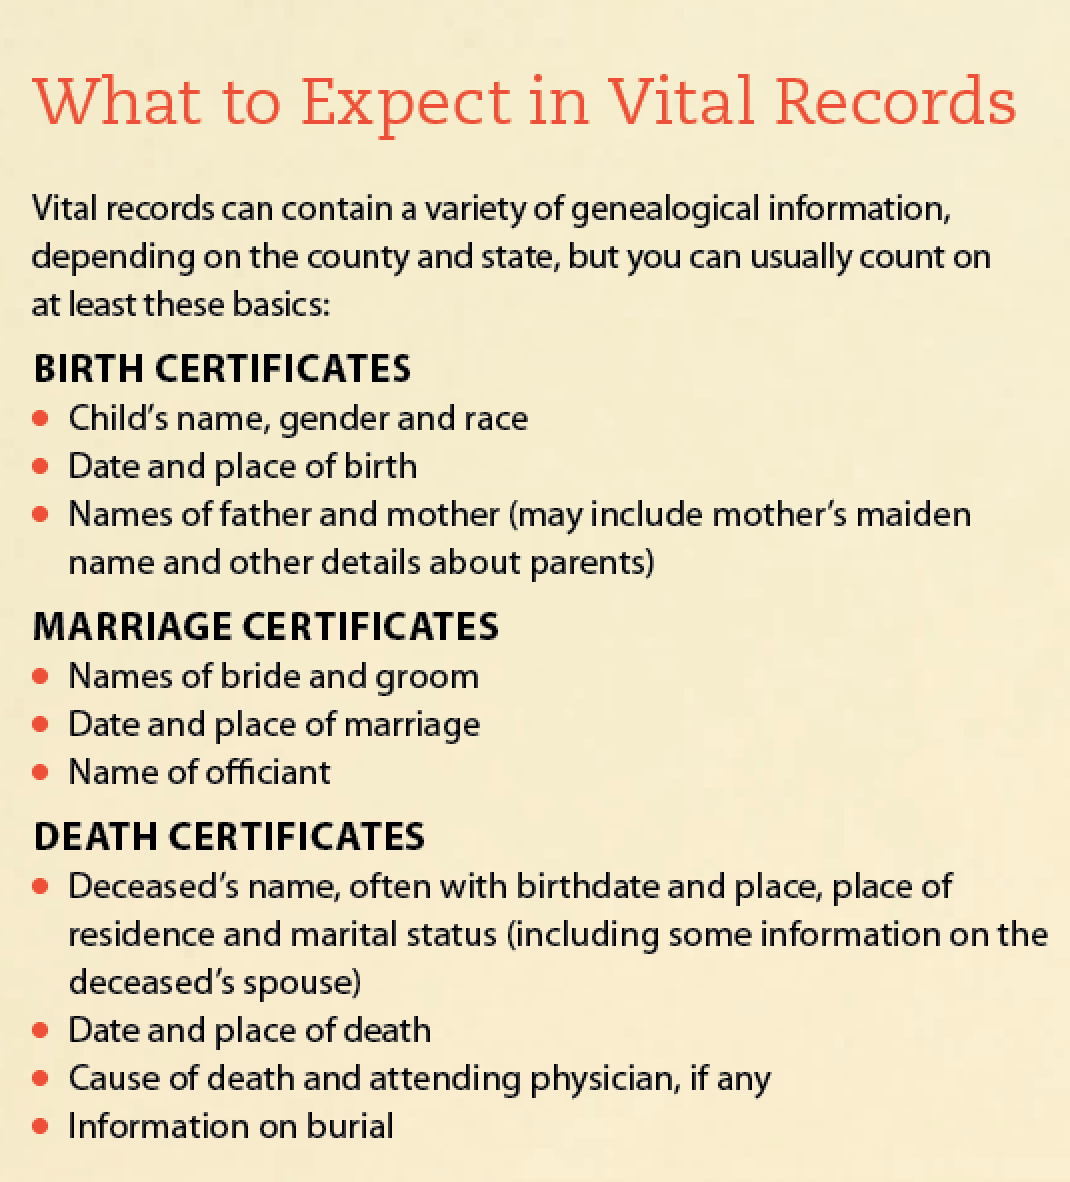 The details in vital records vary by time and location, but you can usually count on a set of facts in birth, marriage and death records.